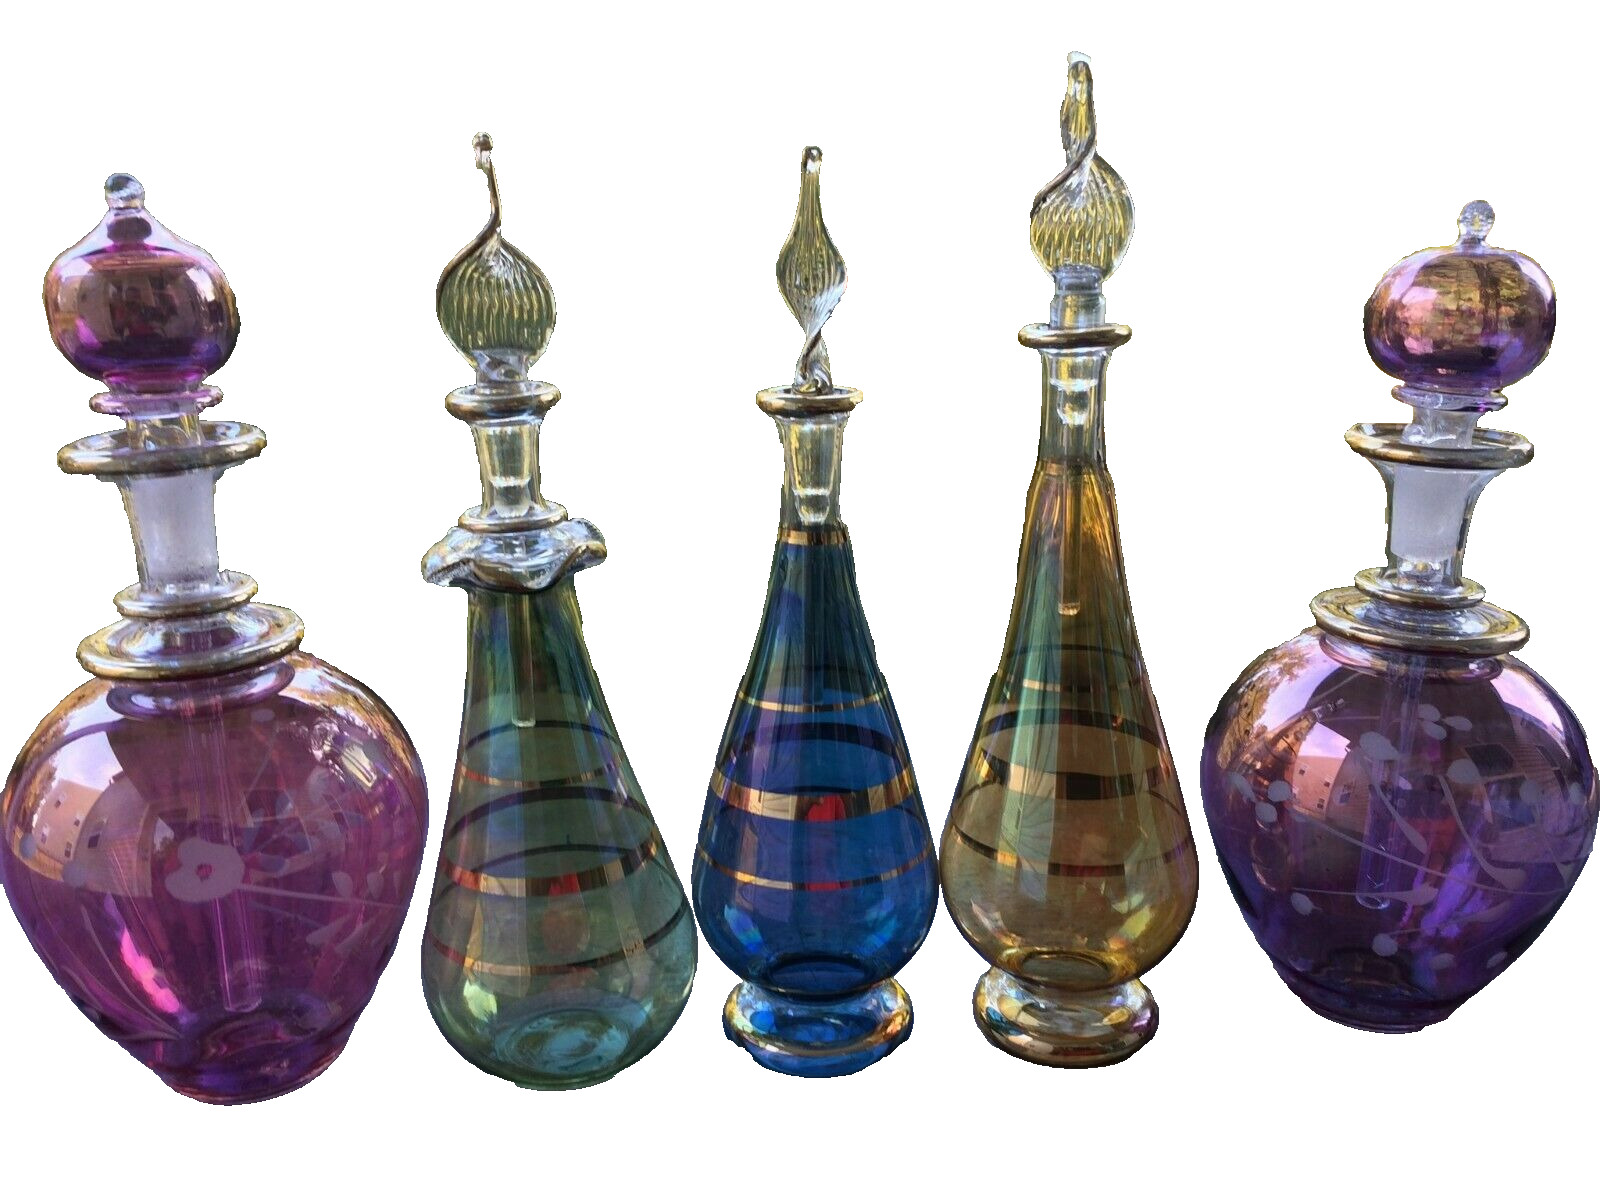 New Egyptian Empty Mouth Blown Perfume Bottles (Set of 5) by Kemet Art 4 Inches